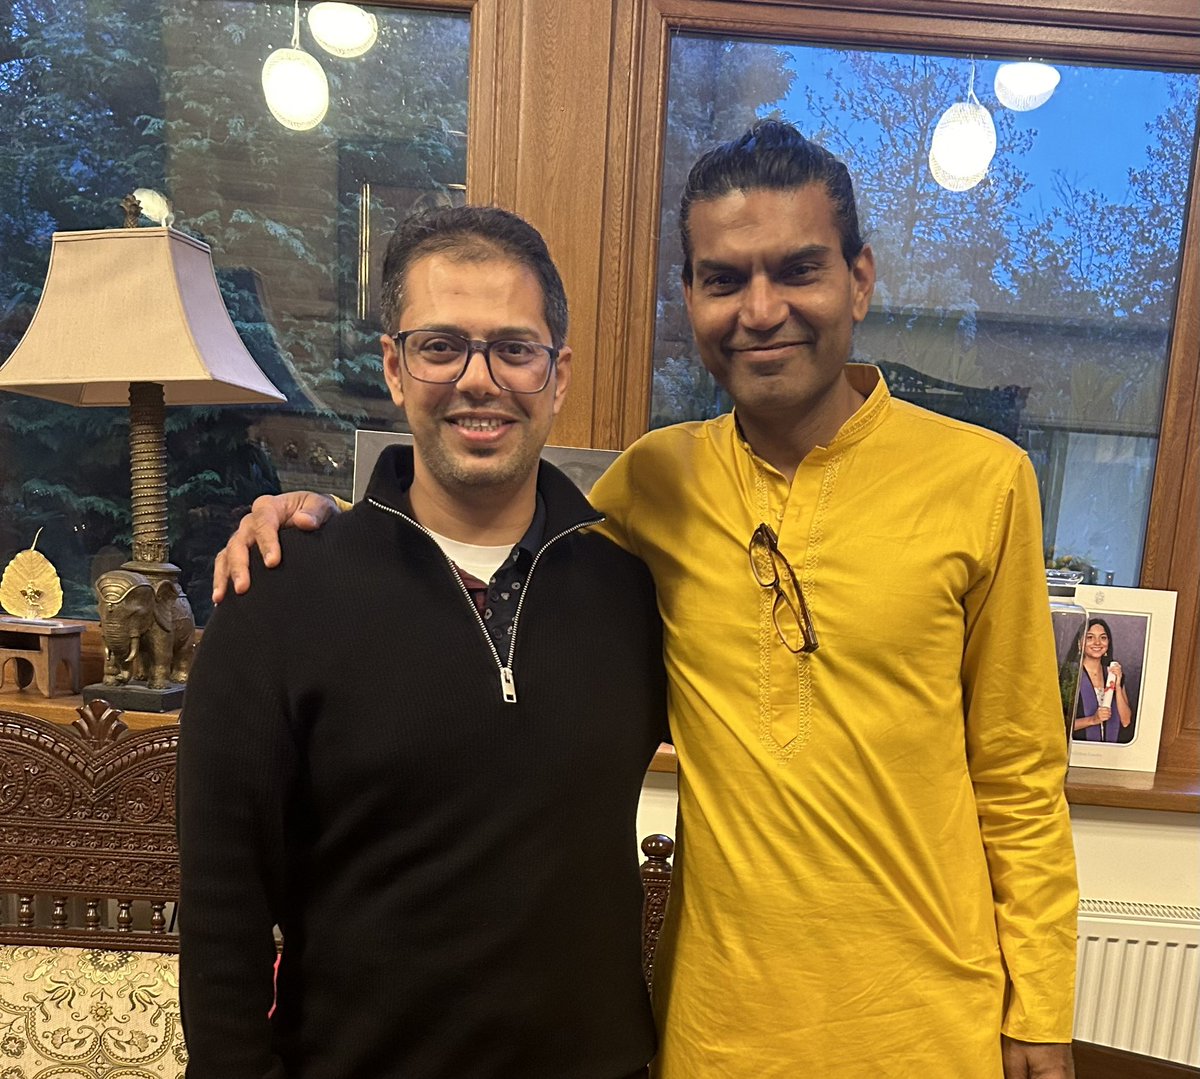 Happy Diwali 🪔, thank you prof Subodh @subodhdave1 for your warm hospitality.